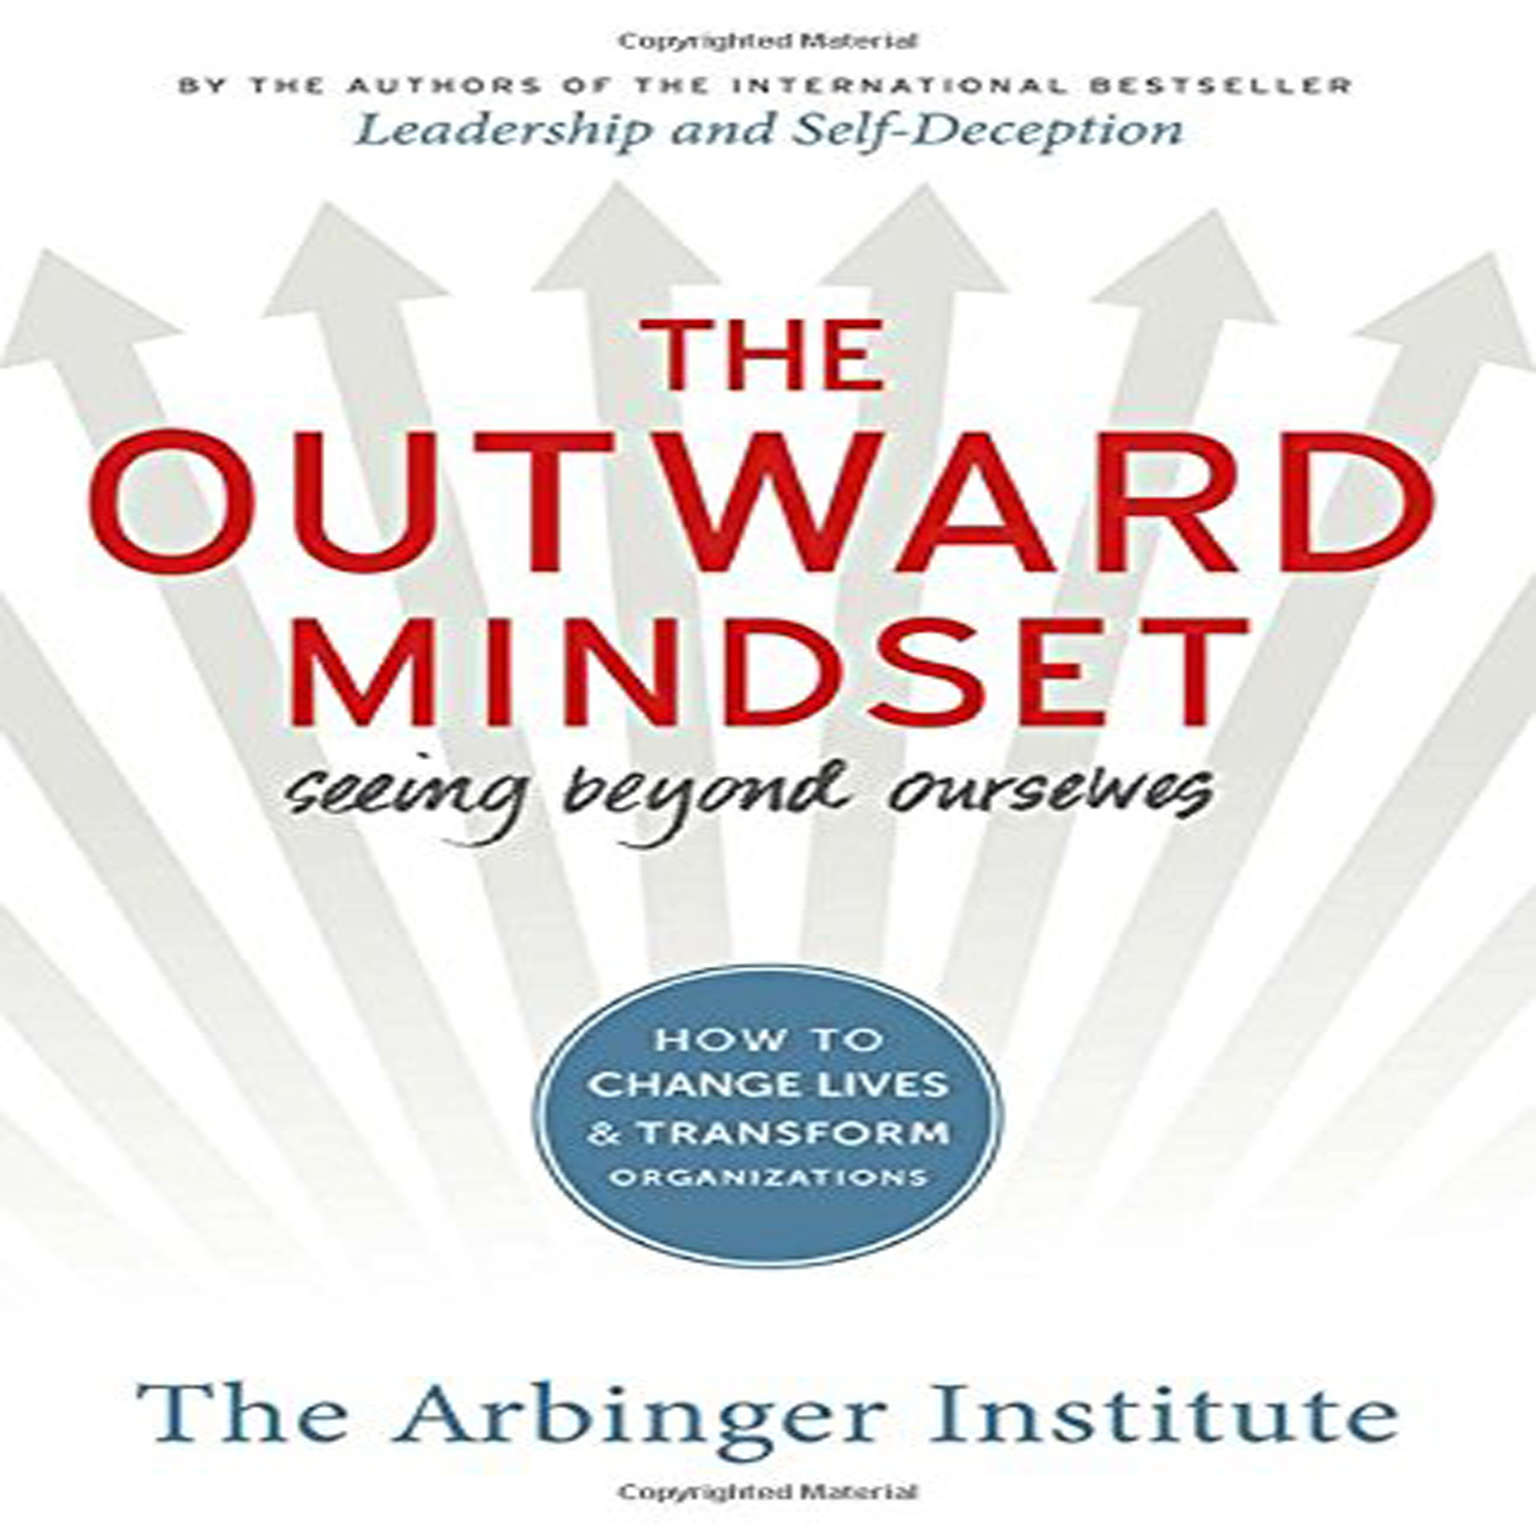 The Outward Mindset: Seeing Beyond Ourselves Audiobook, by the Arbinger Institute